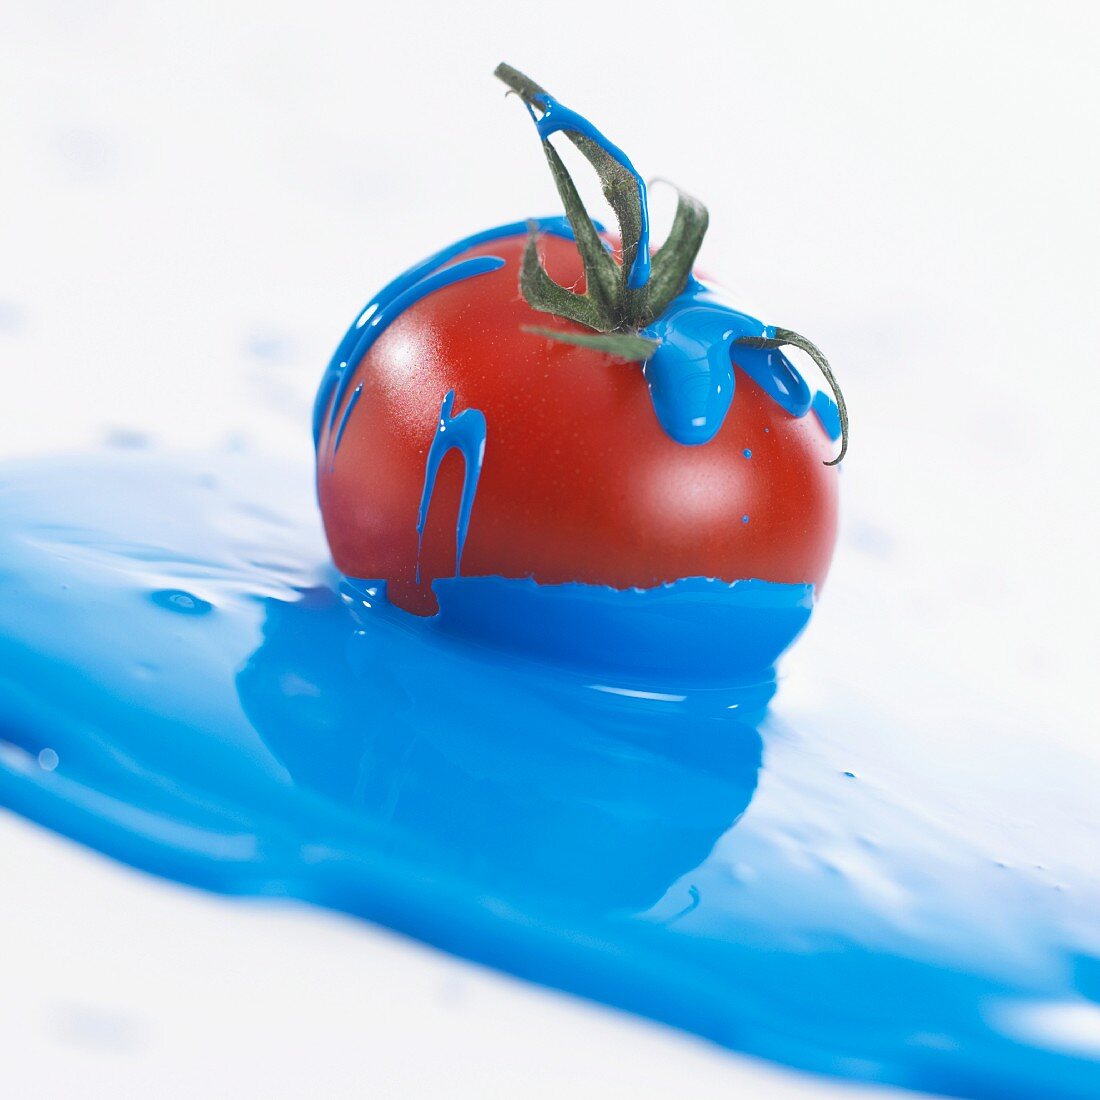 Tomato lying in a puddle of blue paint